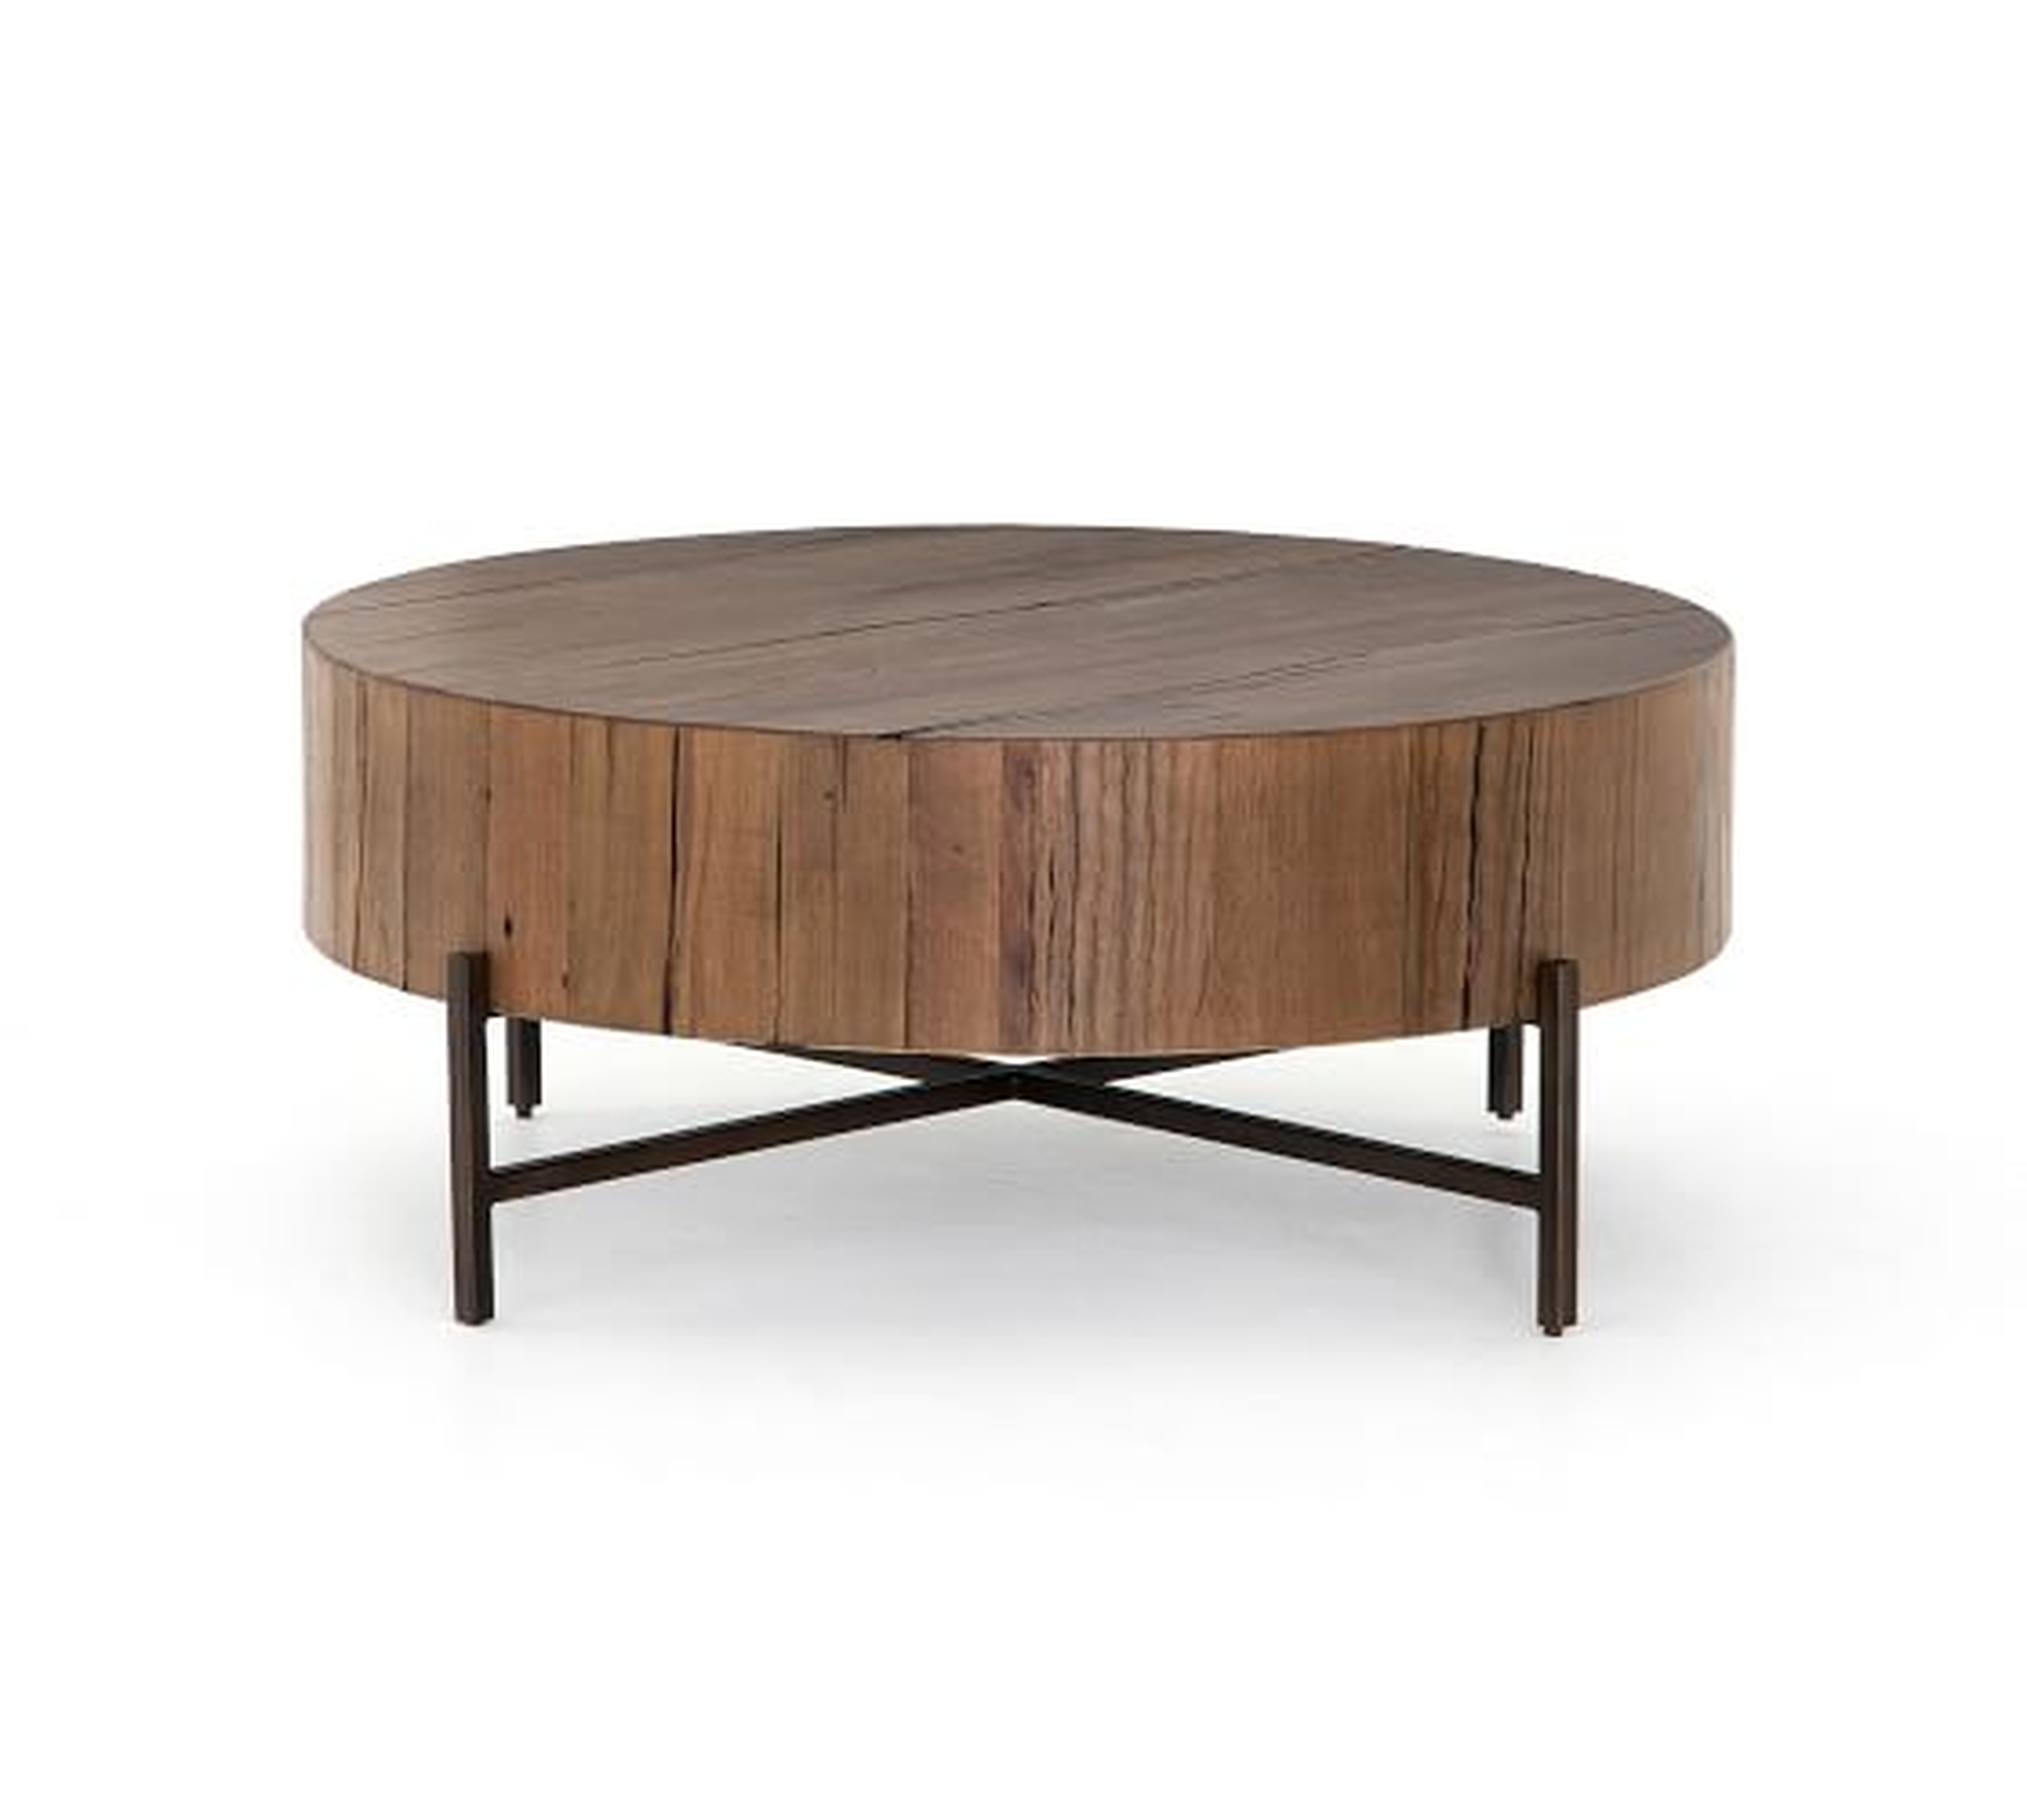 Fargo Round Coffee Table, Natural Brown - Pottery Barn